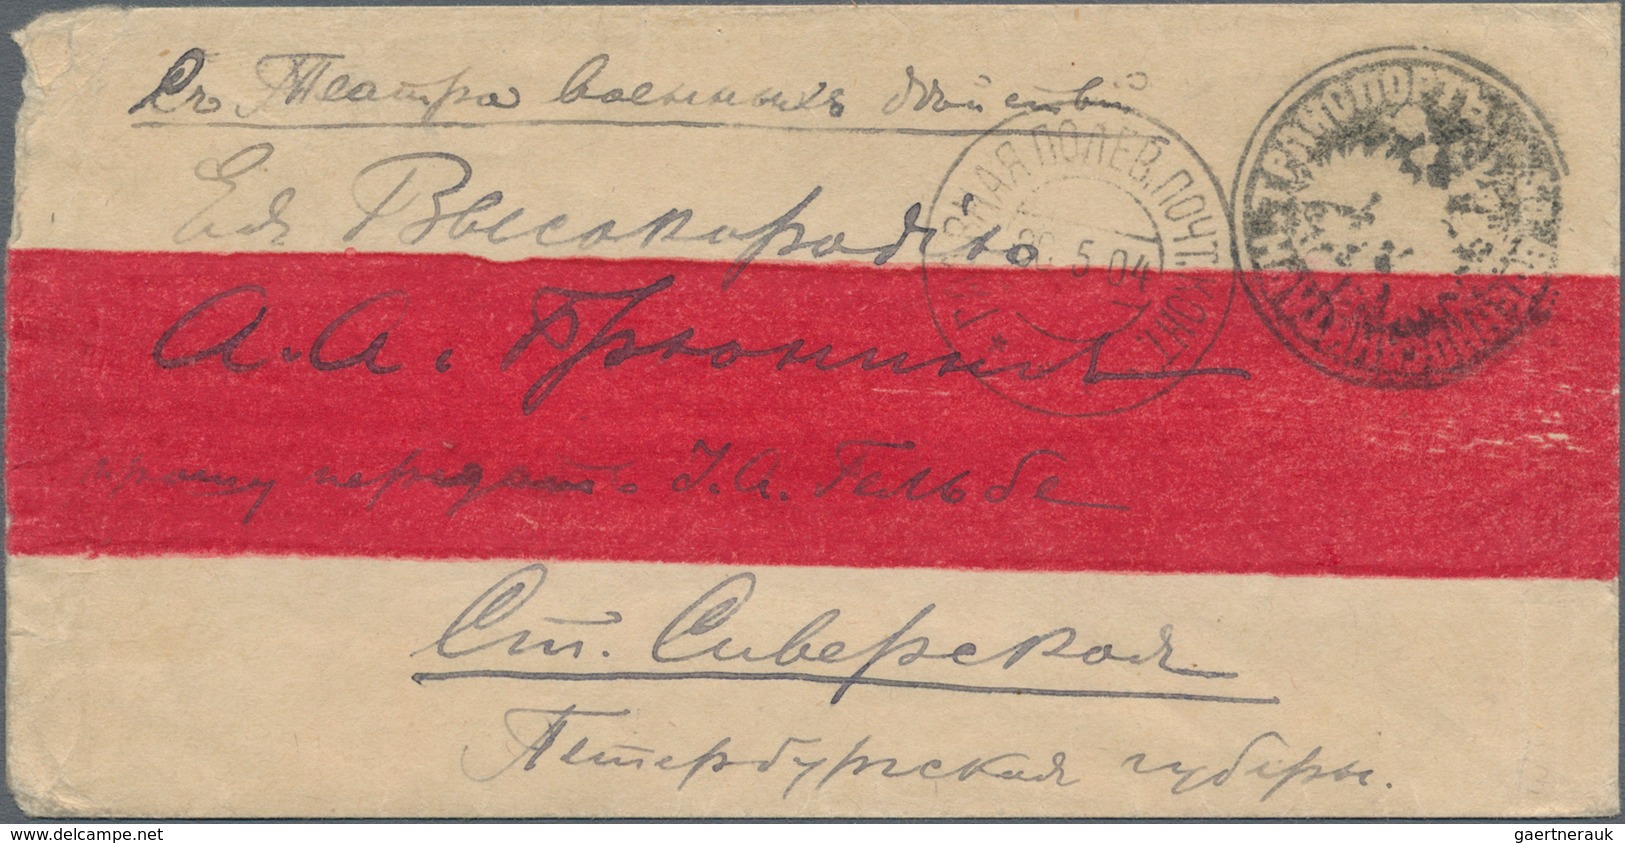 Russische Post In China: 30.05.1904 Russo-Japanese War Chinese Red-band Cover From HEAD FIELD POST O - China